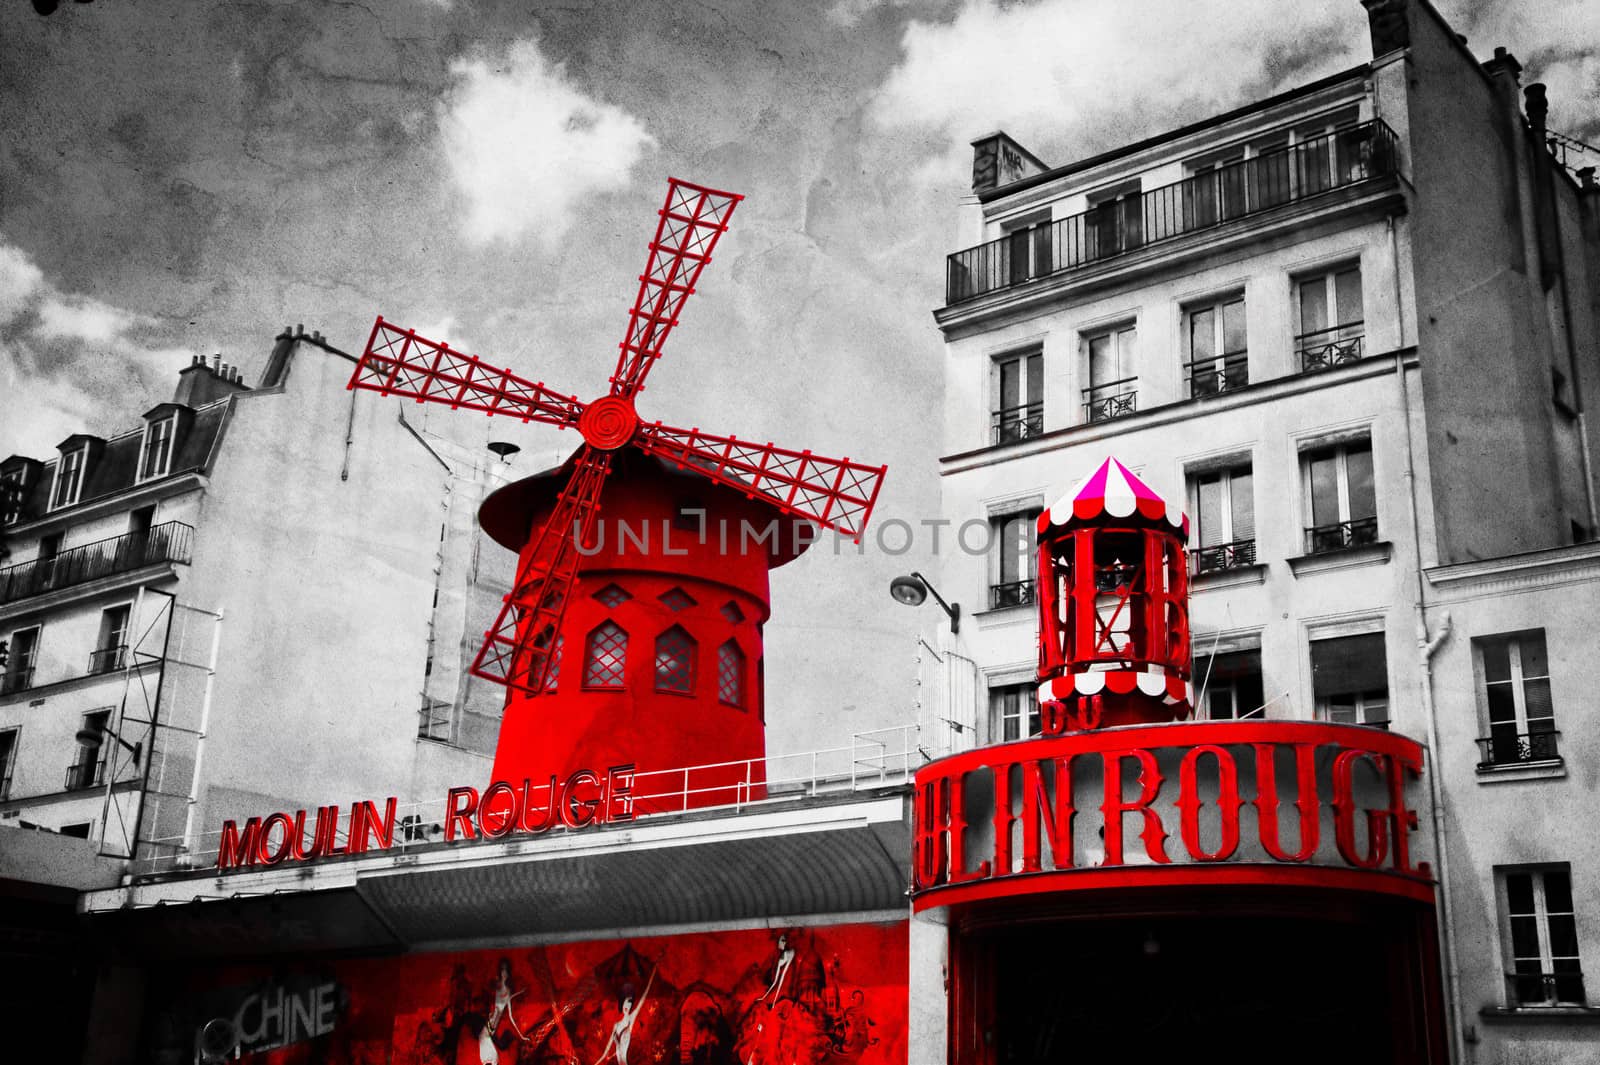 PARIS, FRANCE - June 9: The Moulin Rouge vintage retro depiction in black and white with red elements, on June 9, 2013 in Paris, France. Moulin Rouge is the most famous Parisian cabaret